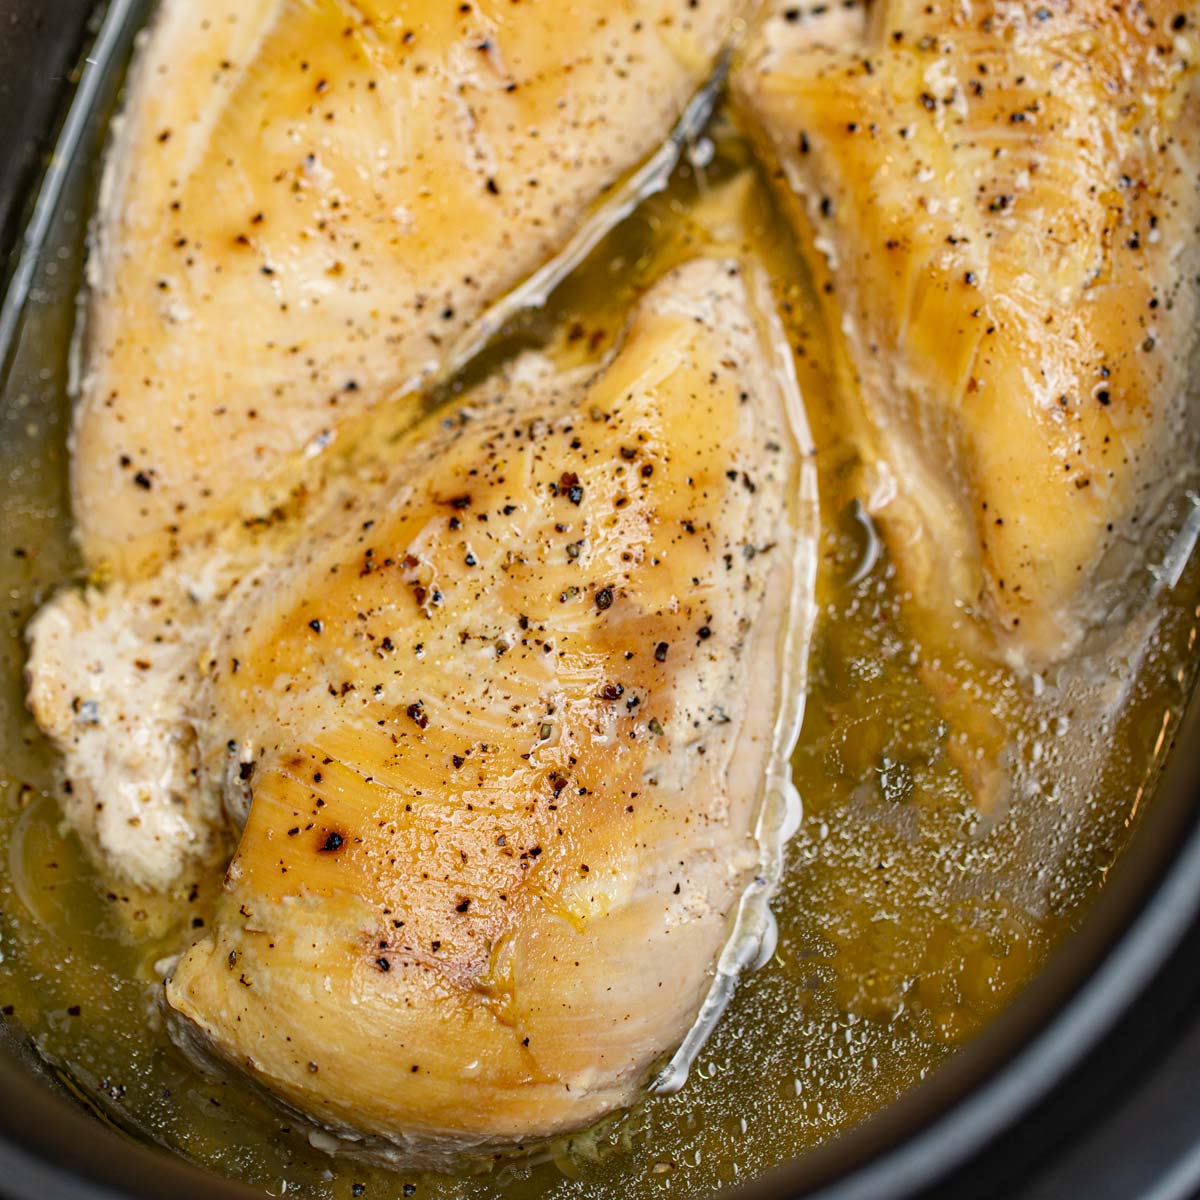 Safe to cook chicken in slow cooker?